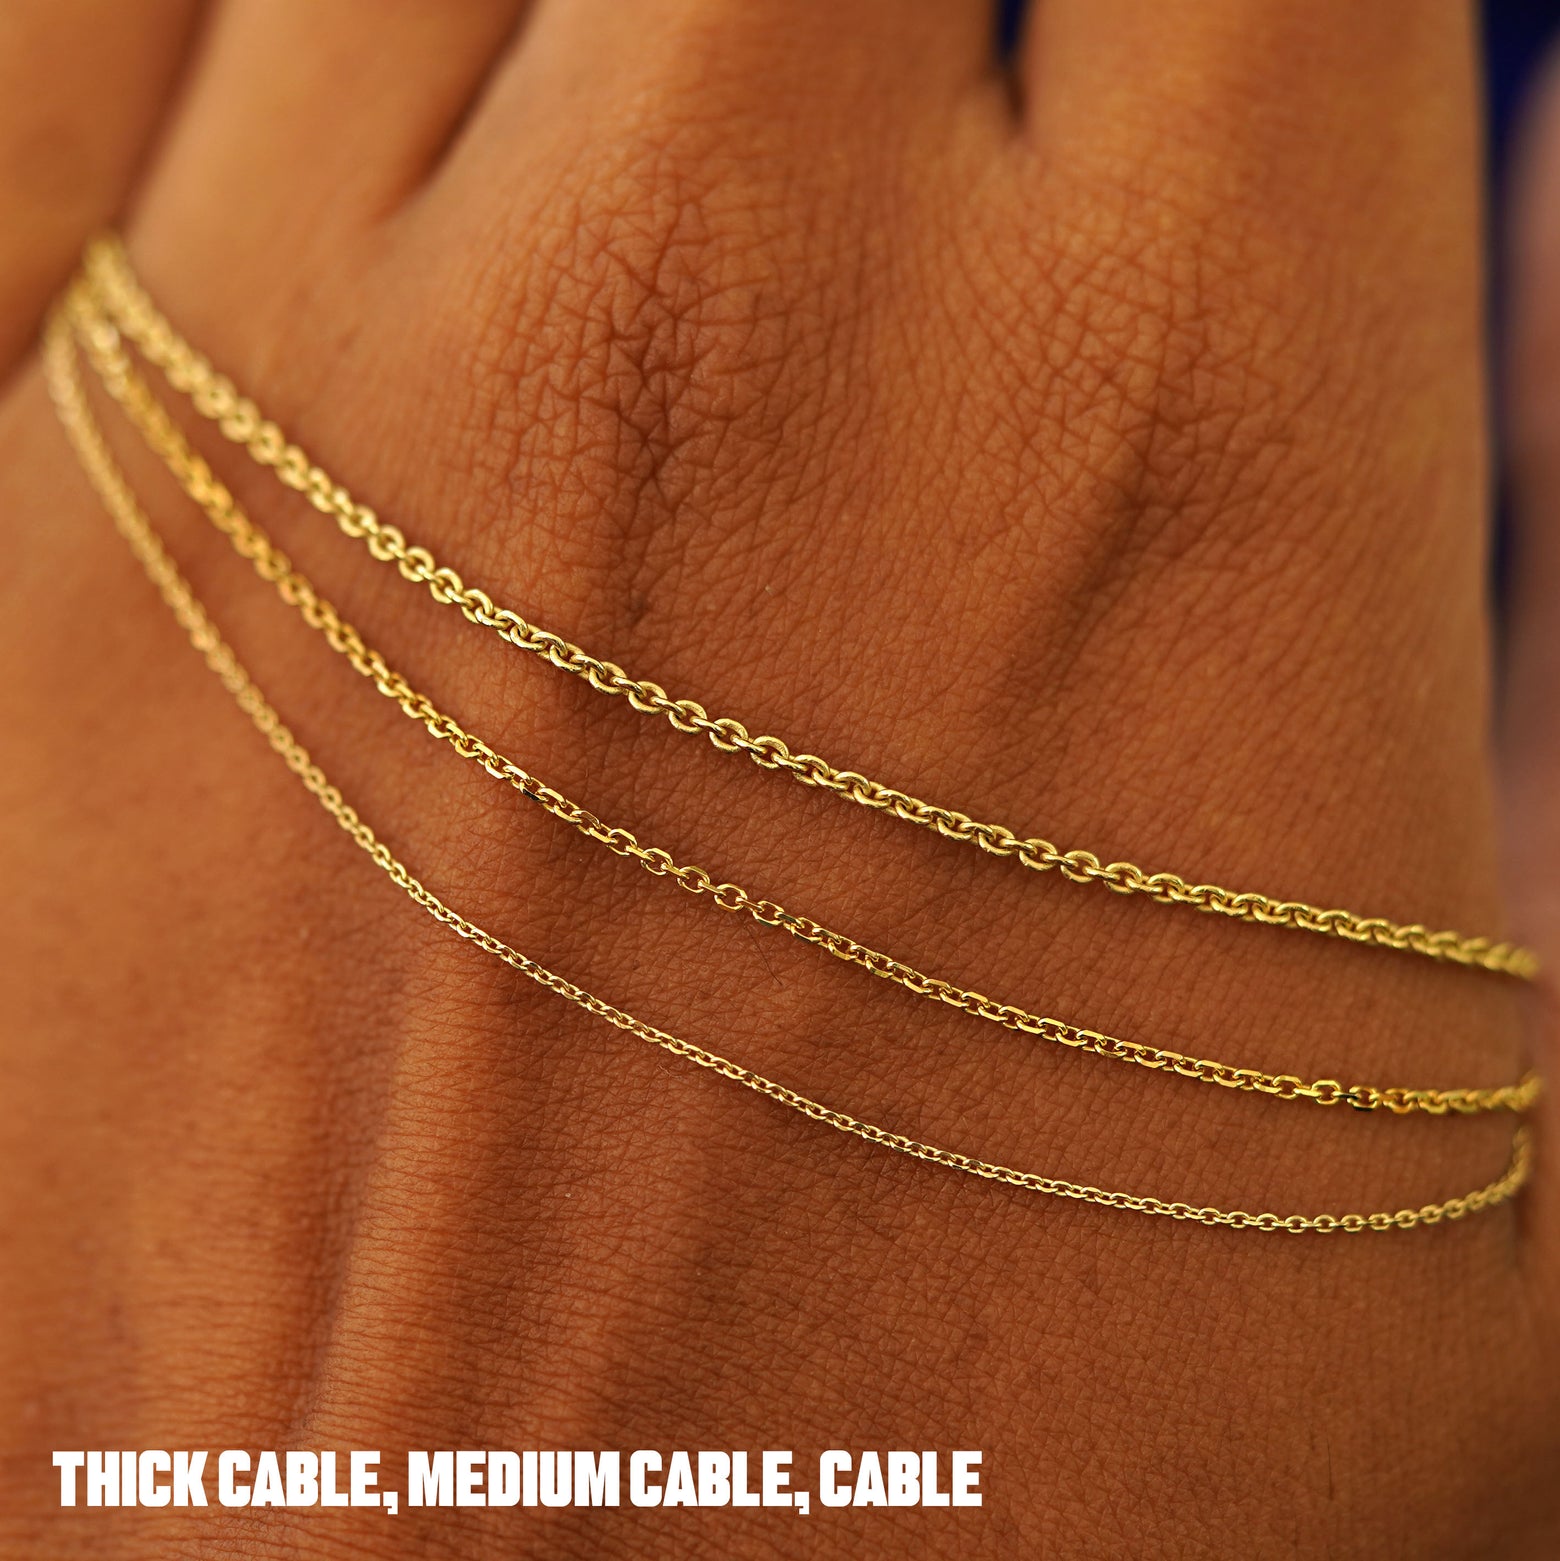 Thick Cable, Medium Cable, and classic Cable chains draped across the back of a model's hand to show difference in thickness